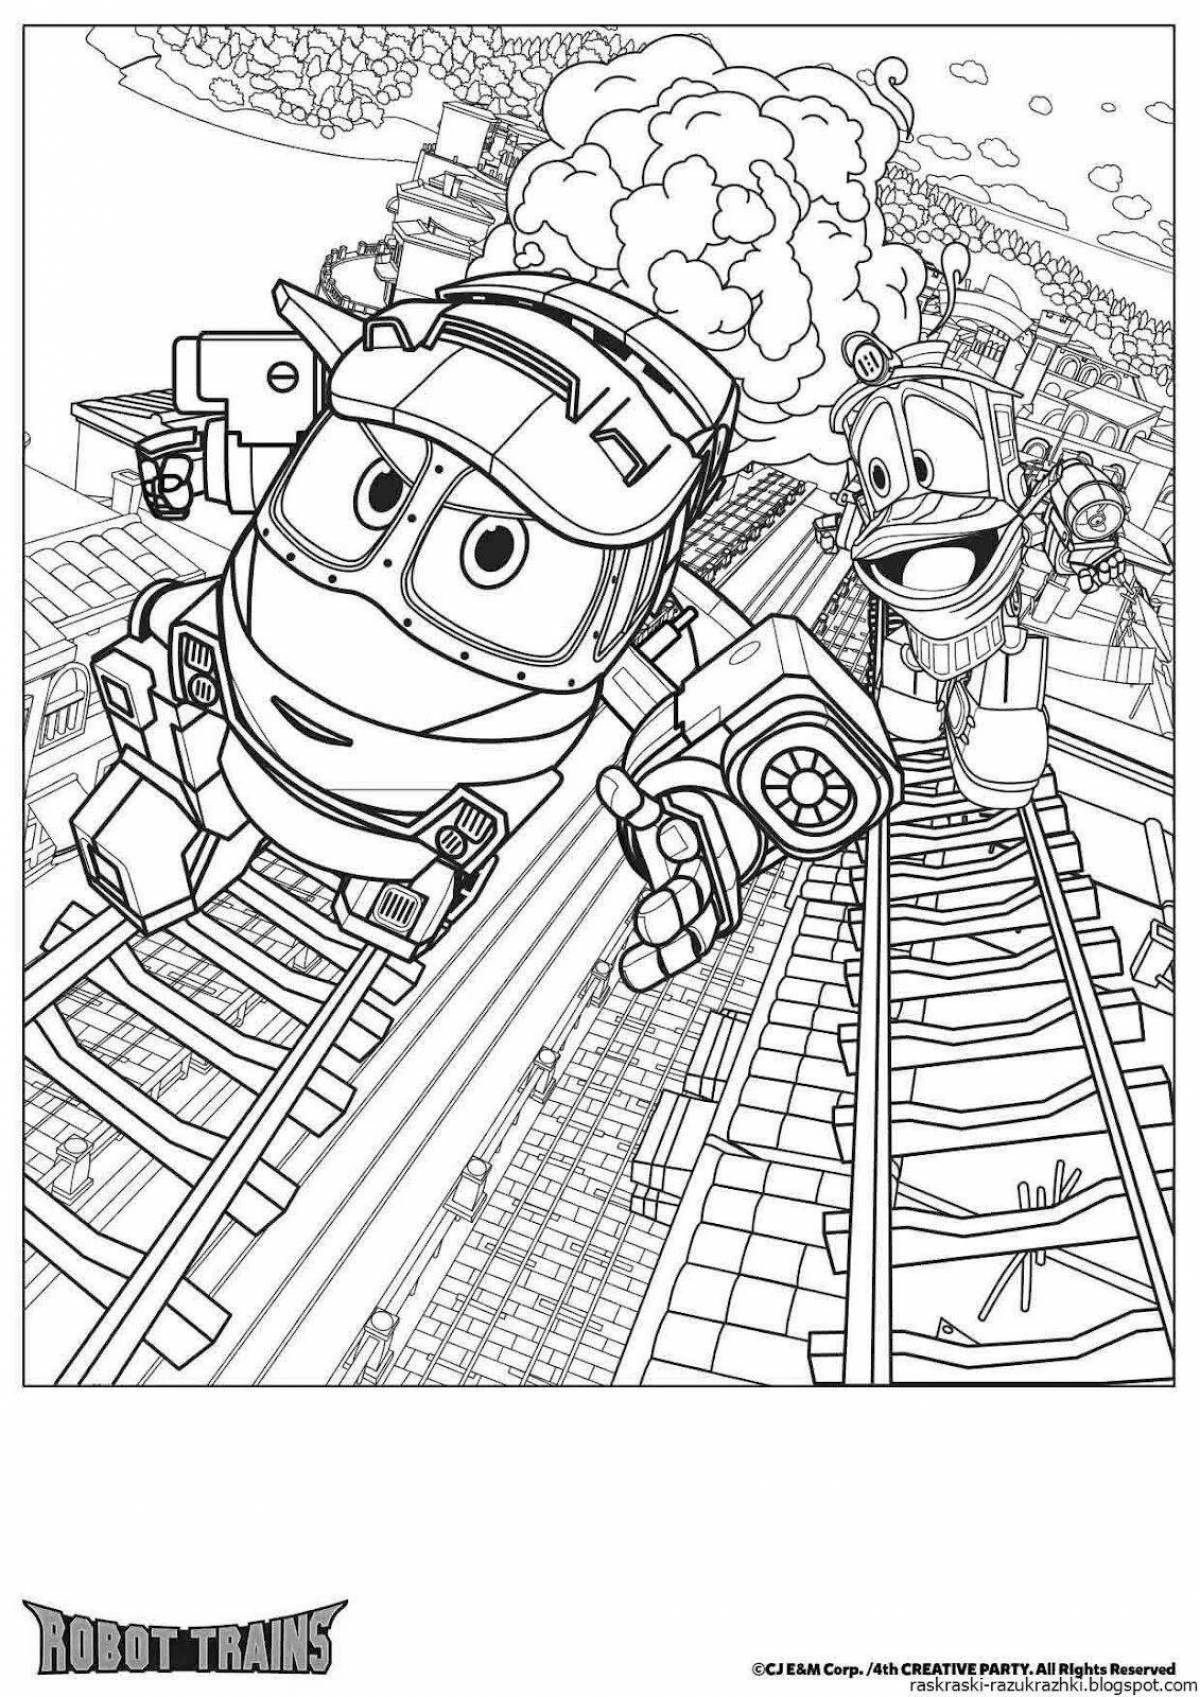 Maxi freaky robot train coloring page